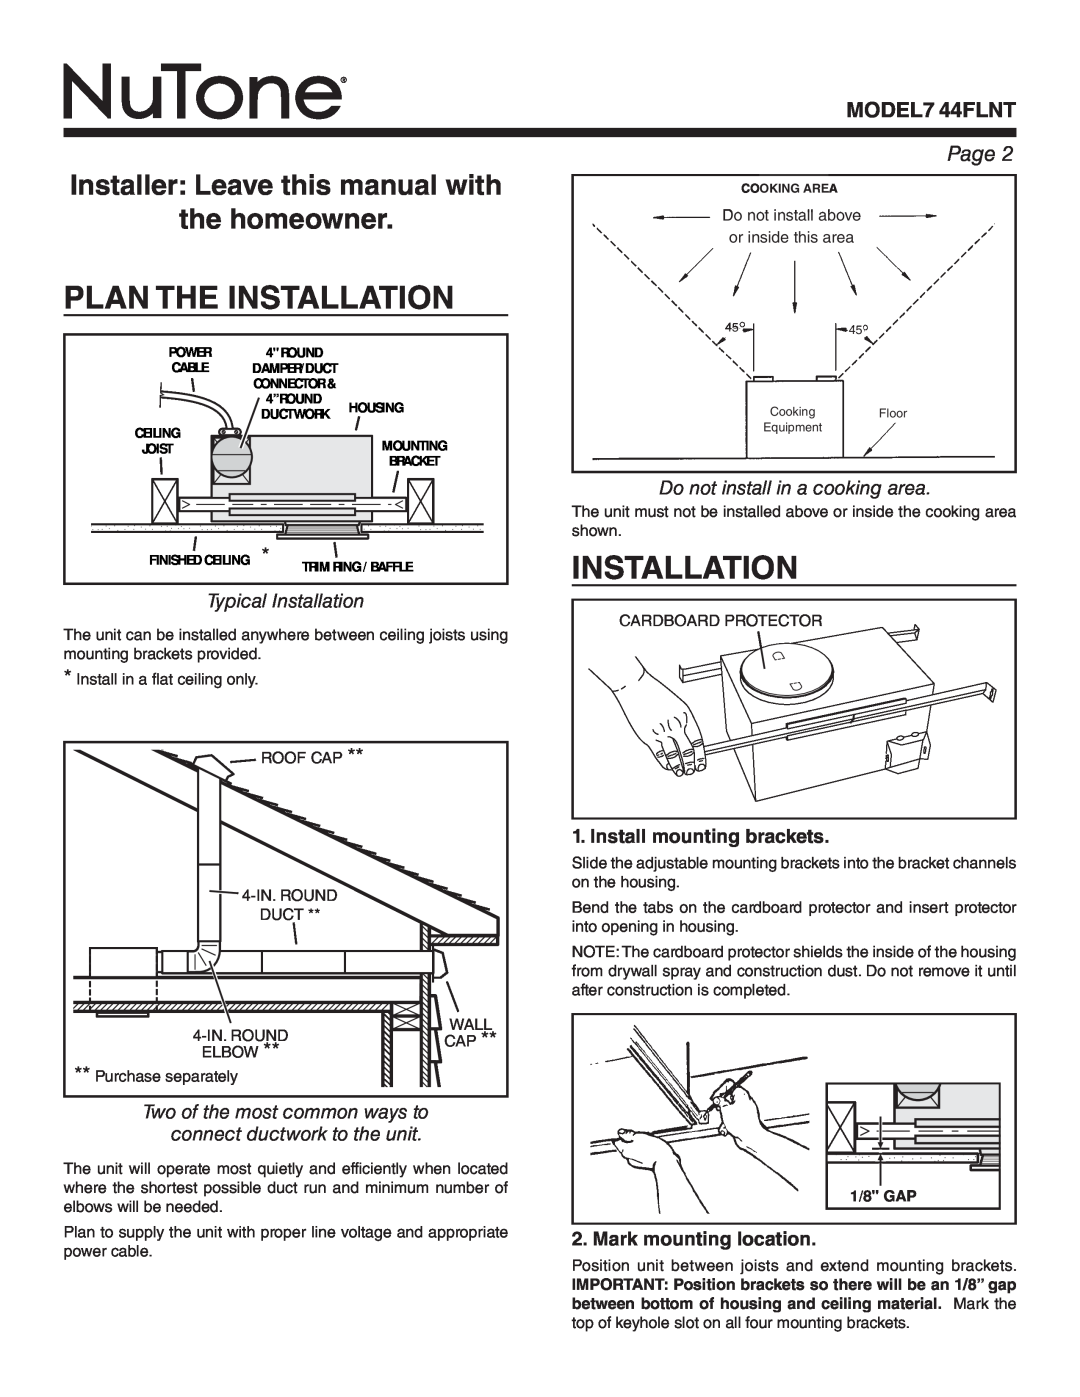 NuTone 744FLNT Plan The Installation, Installer Leave this manual with the homeowner, Typical Installation, MODEL7 44FLNT 